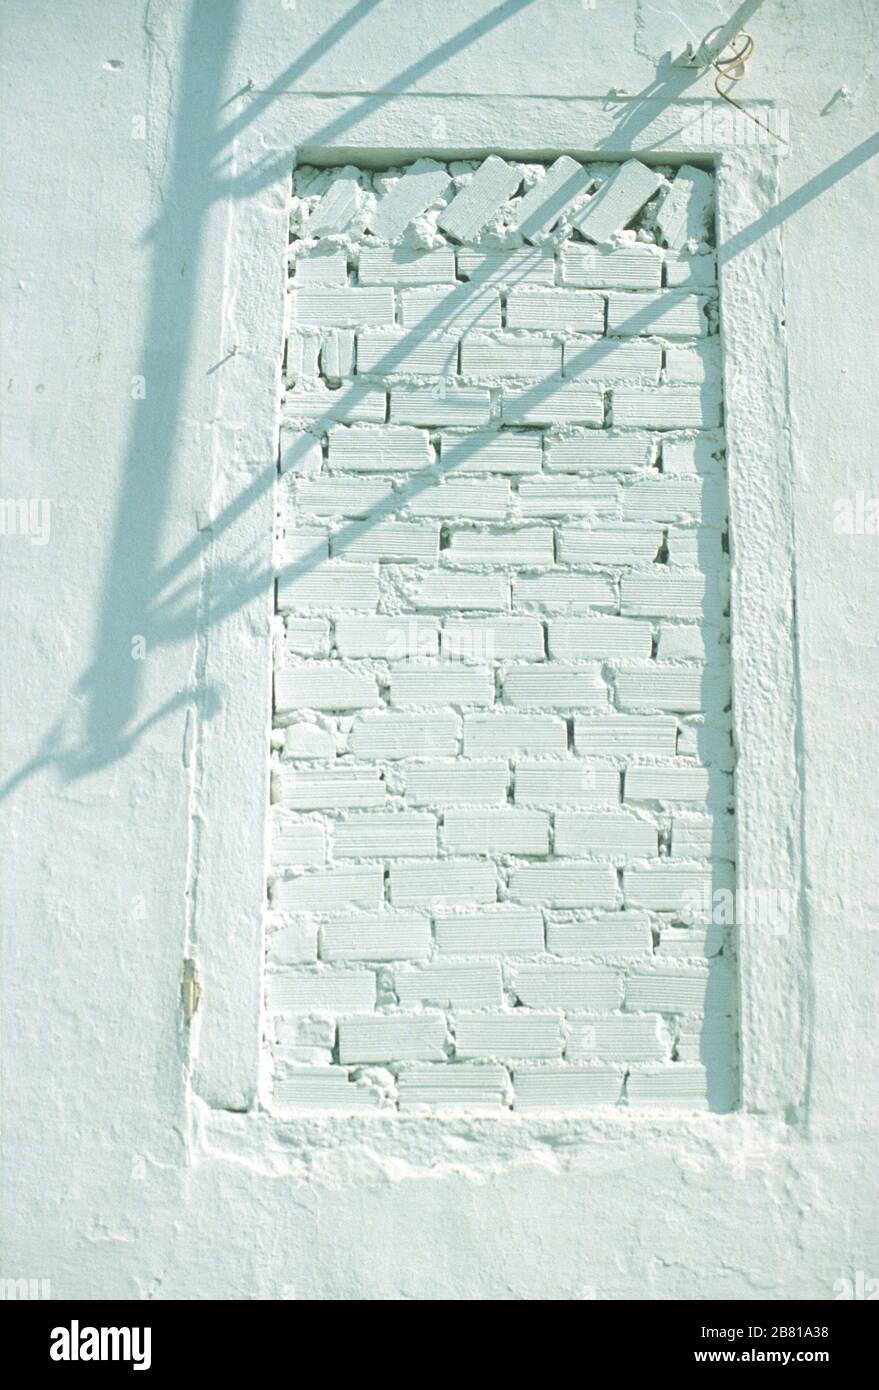 A bricked up window, set high up on the white, stone wall of a building in Parga, Preveza, Epirus, Greece. The electricity wires above cast a shadow on the wall. Stock Photo